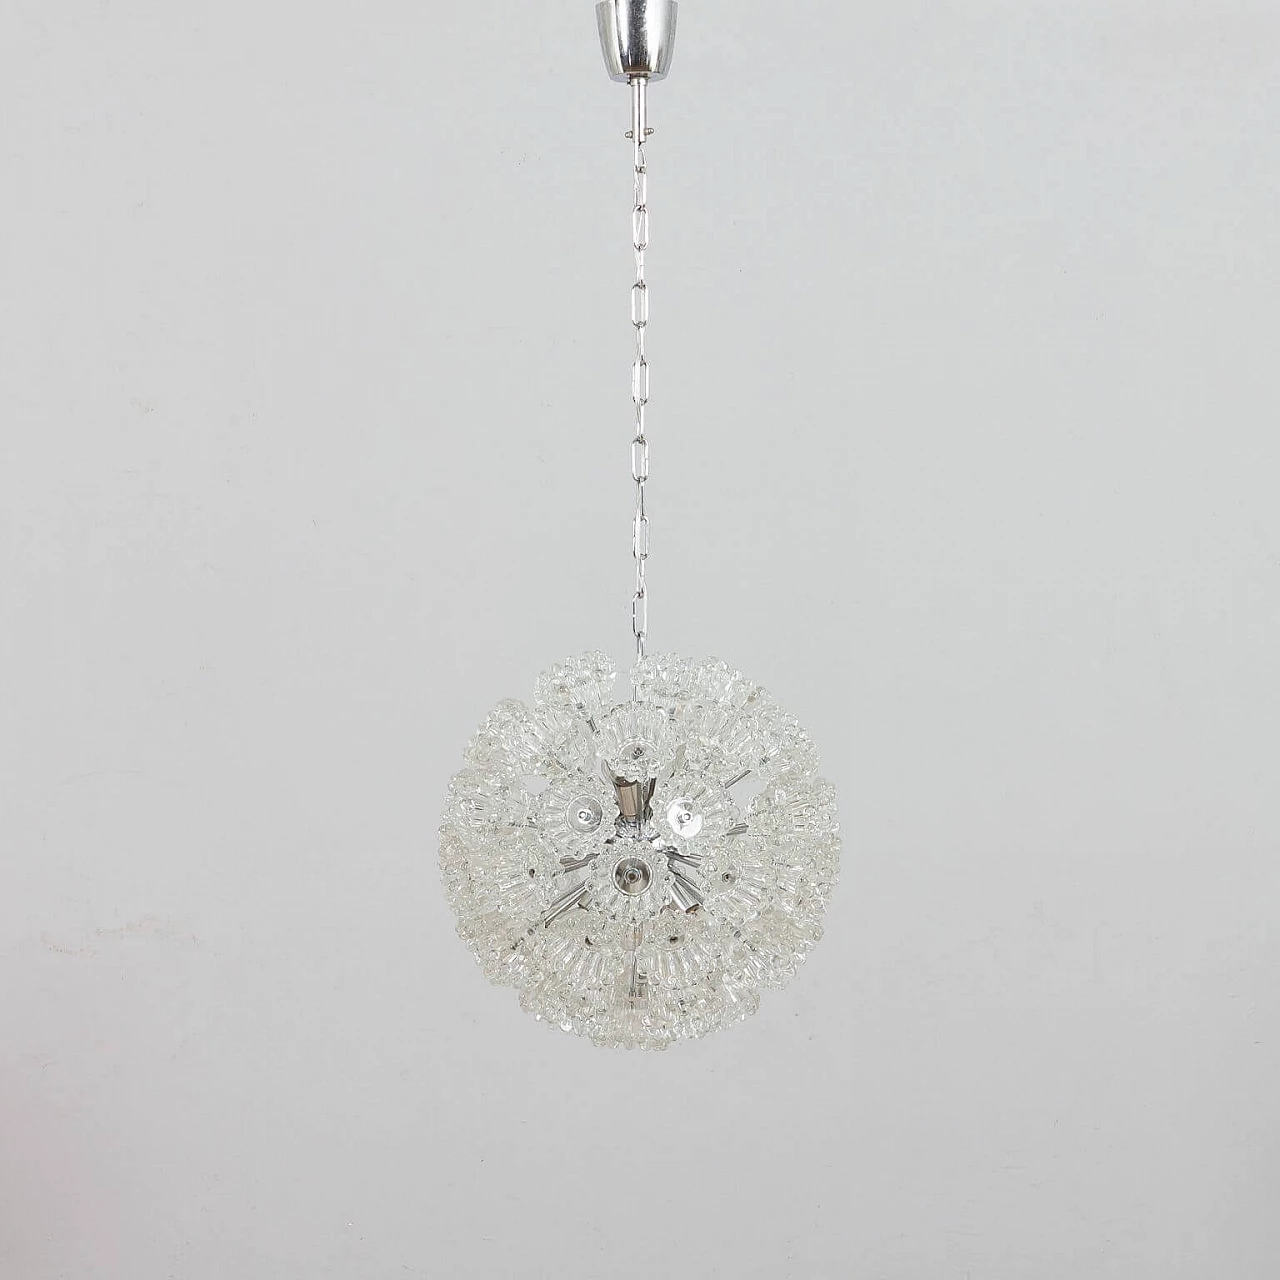 Sputnik chandelier in Venini style with flowers in Murano glass and chromed metal, 70s 1360266